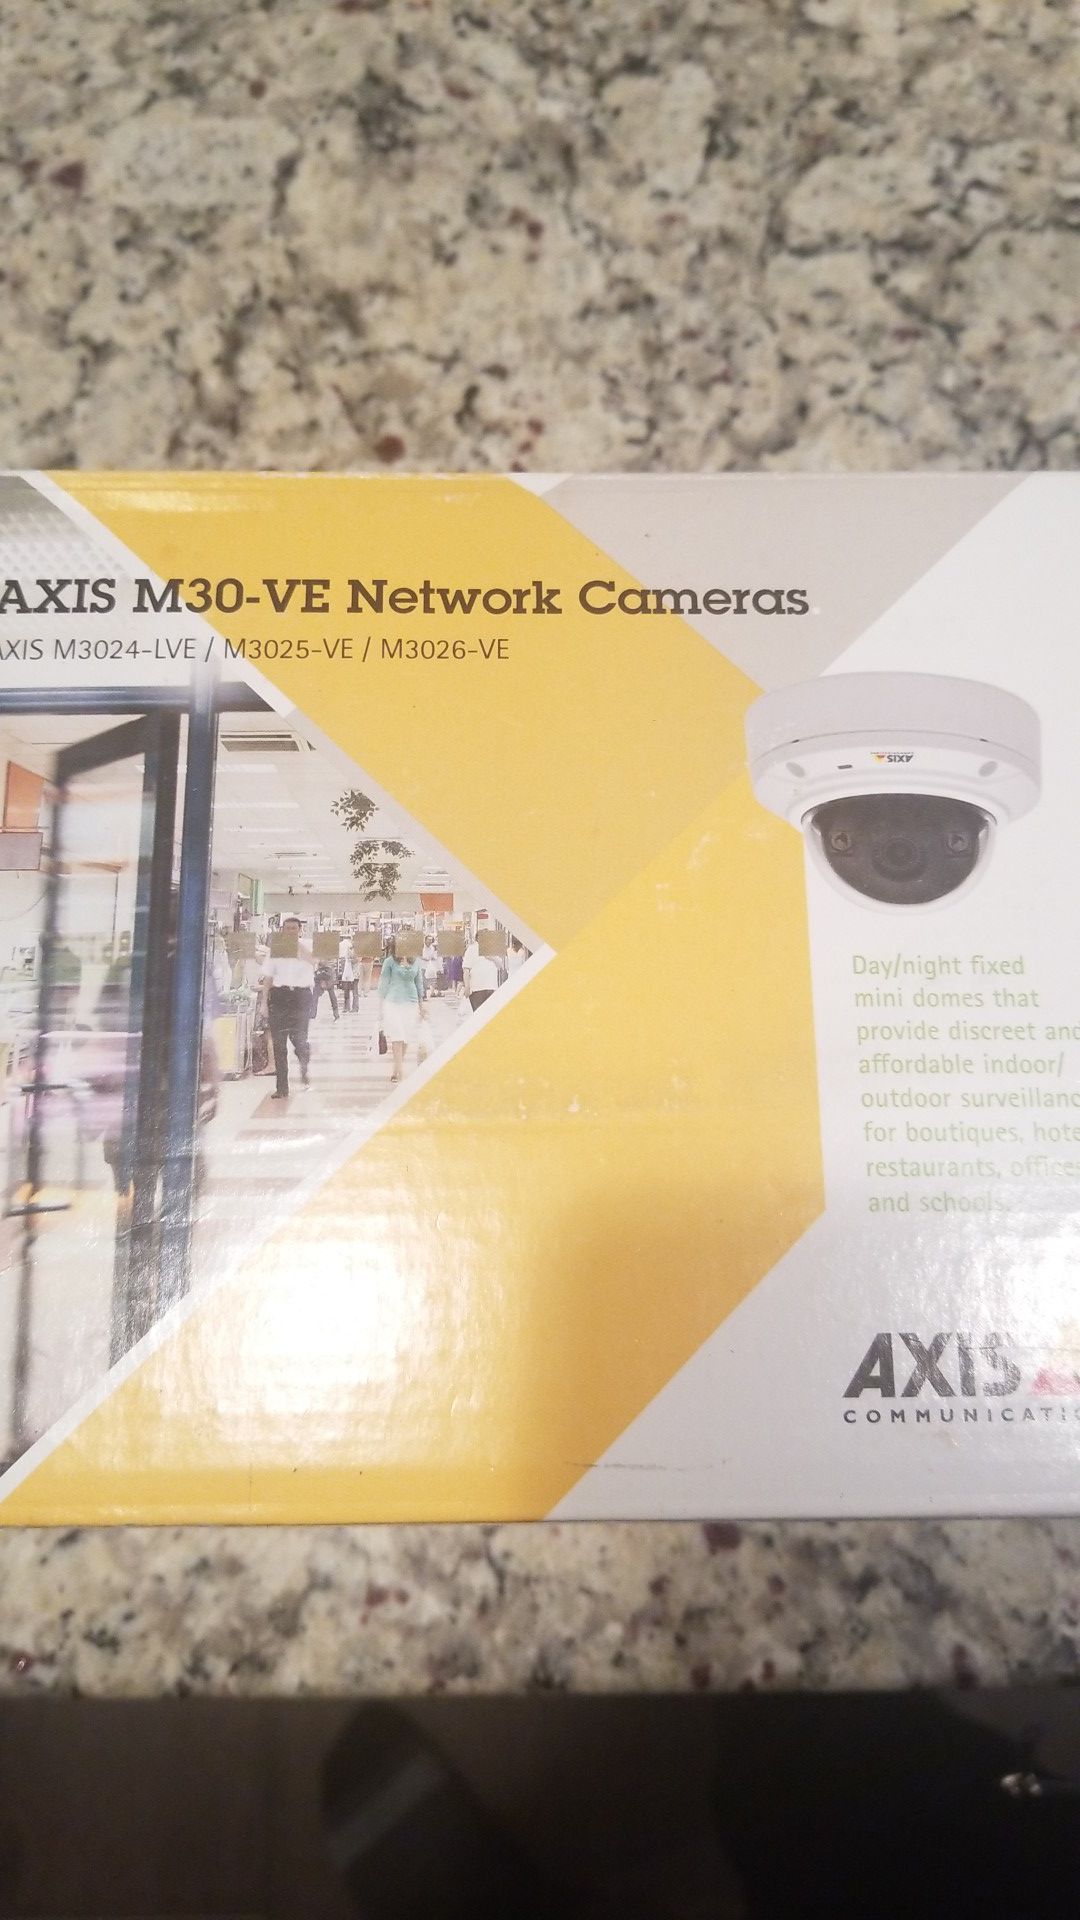 NEW AXIS M3026-VE Network Camera